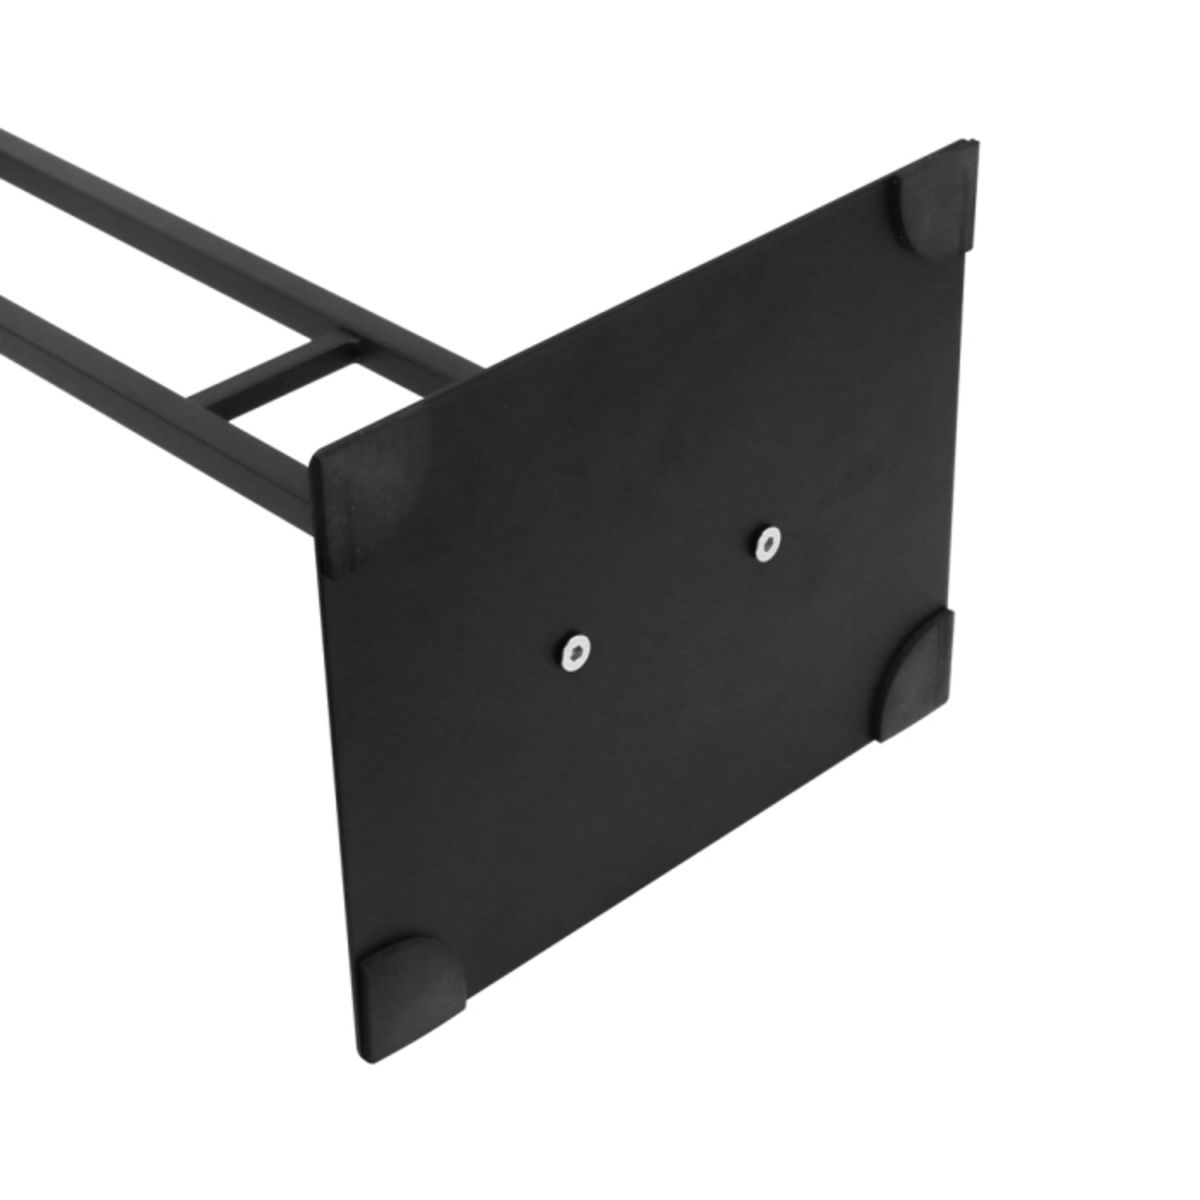 Sturdy metal base with rubber feet for added grip for your displays.png